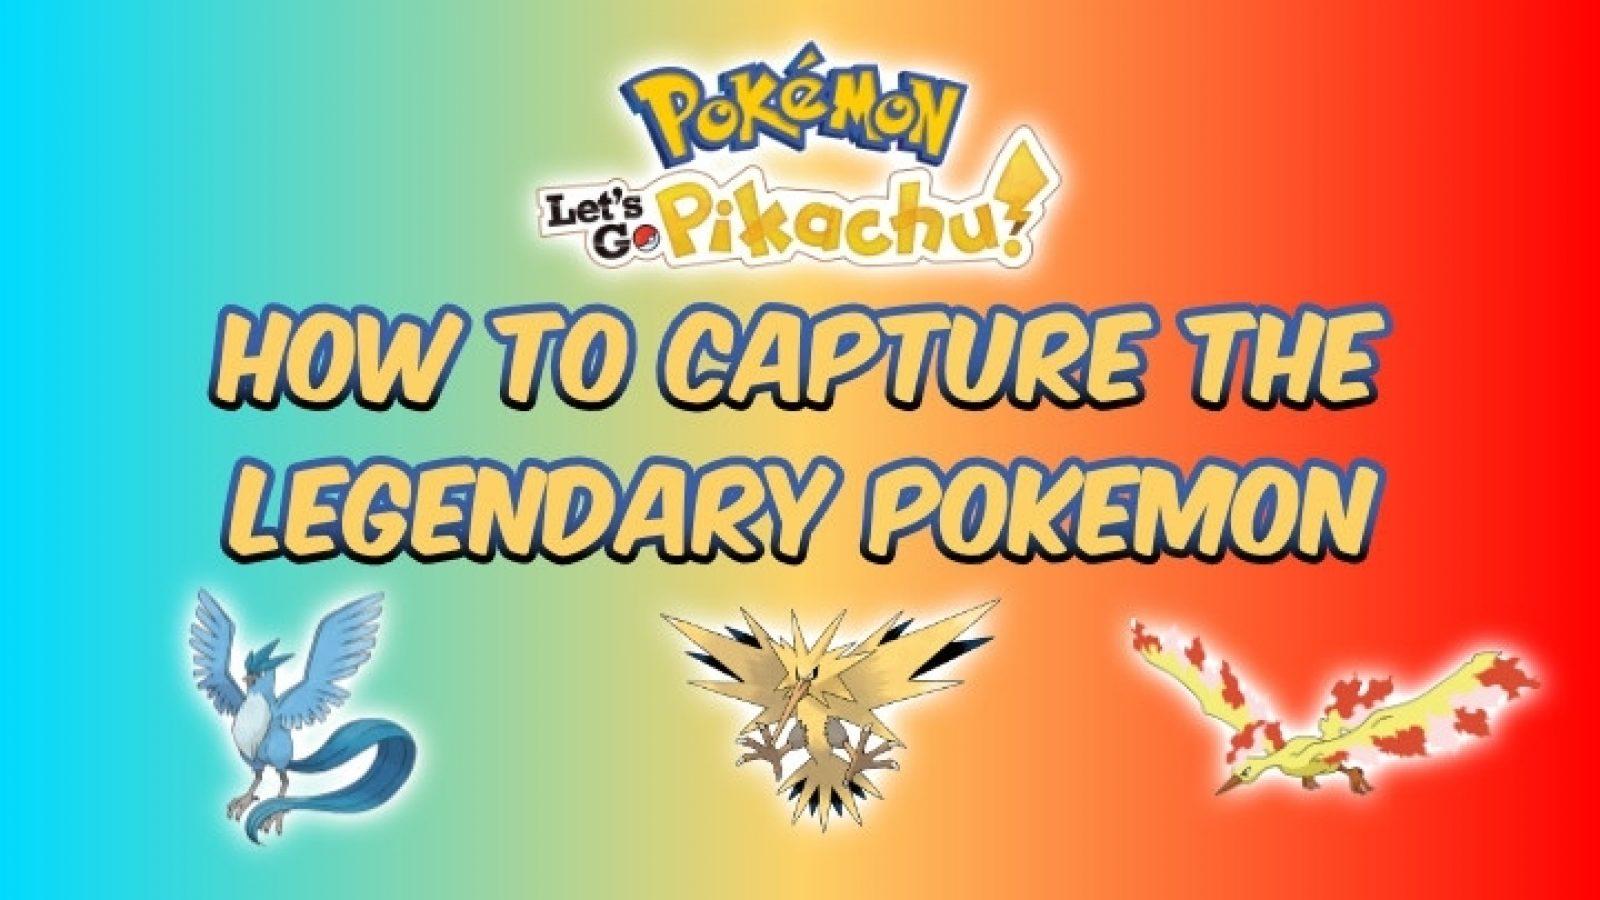 Pokémon Let's Go Victory Road and how to find Moltres - available